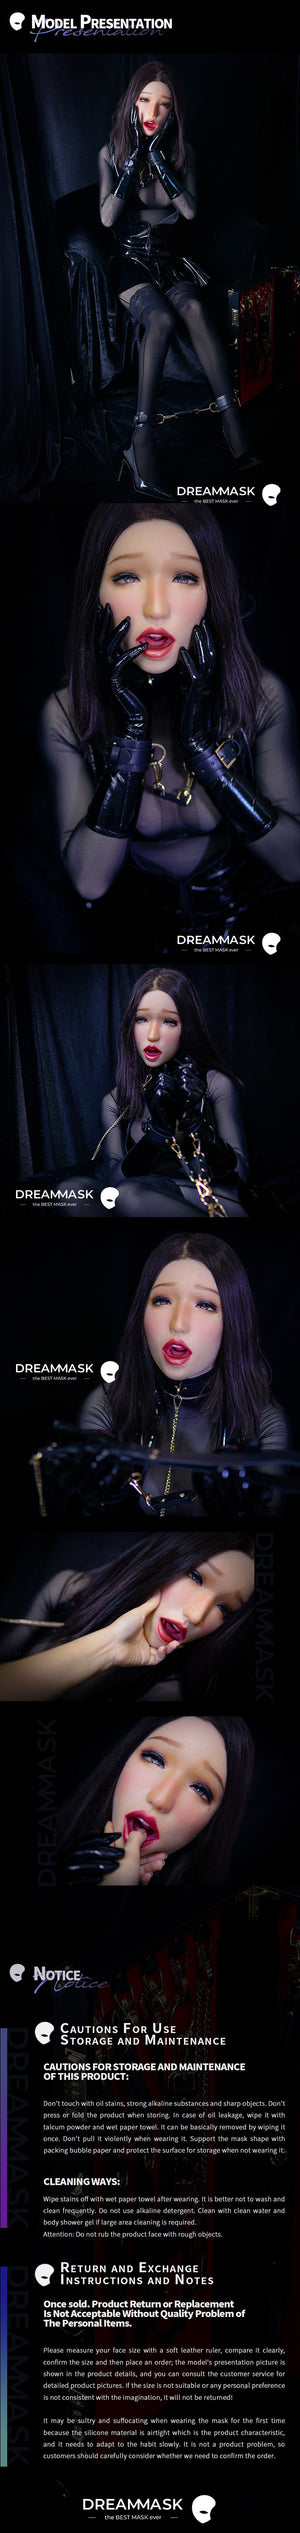 Full head Silicone Female Mask Dreammask M18 Violet Pull-Over Hood Crossdress Cosplay for TG CD Dragqueen Ladyboy